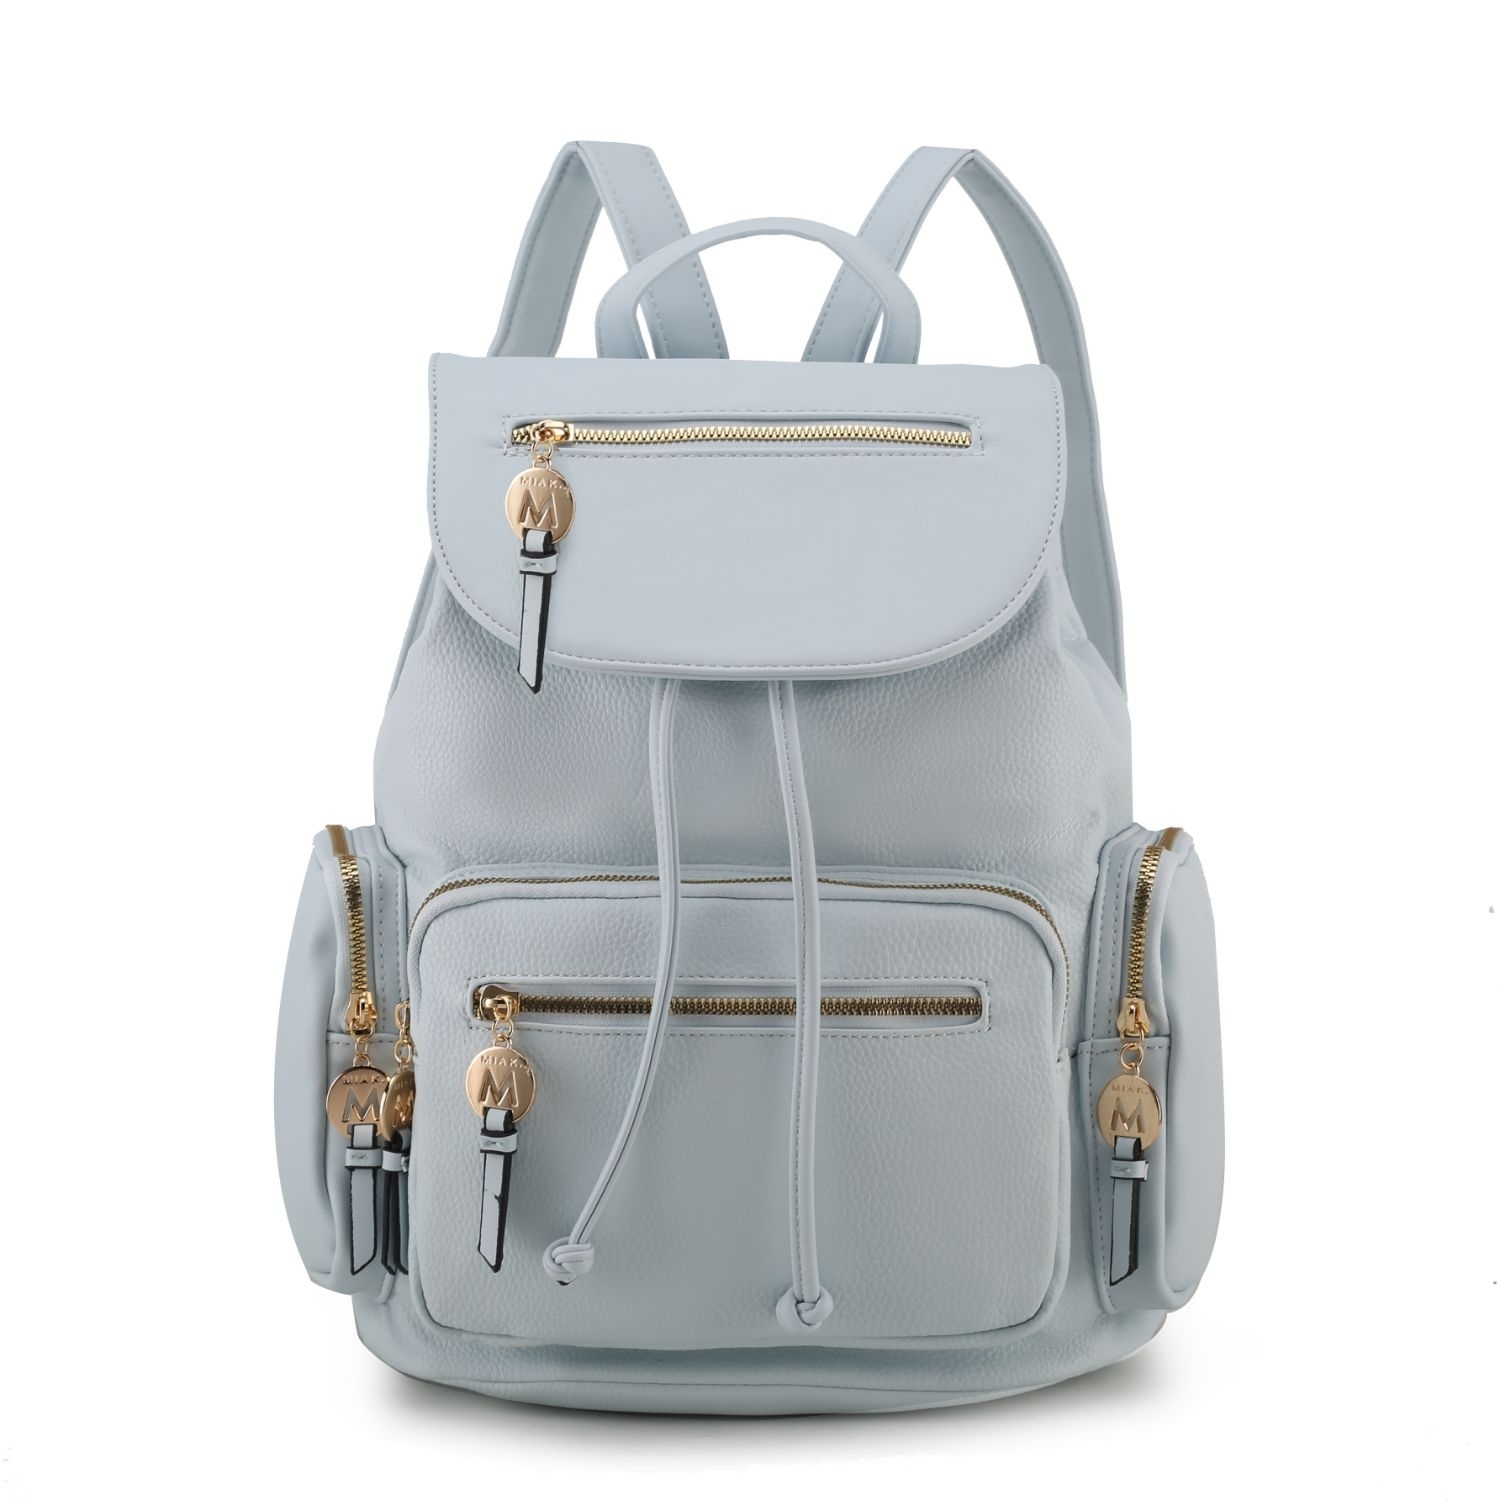 MKF Collection Ivanna Vegan Leather Women's Oversize Backpack By Mia K - Light Blue